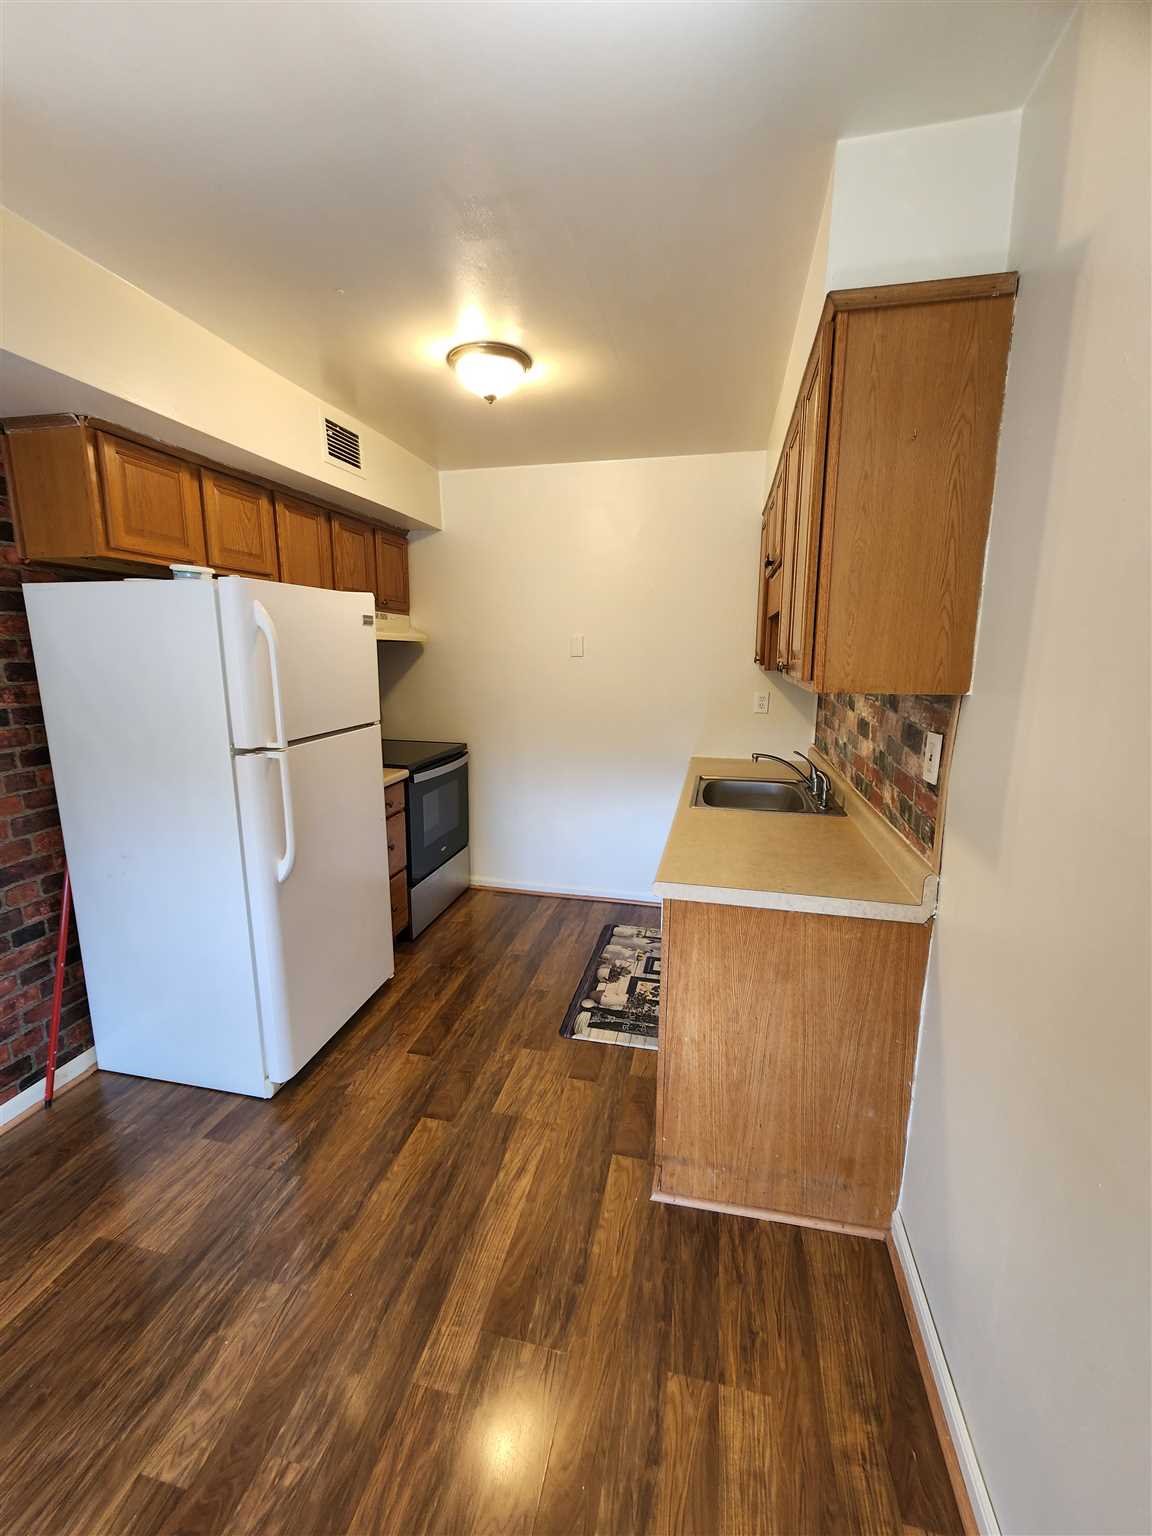 a utility room with wooden floor washer and dryer